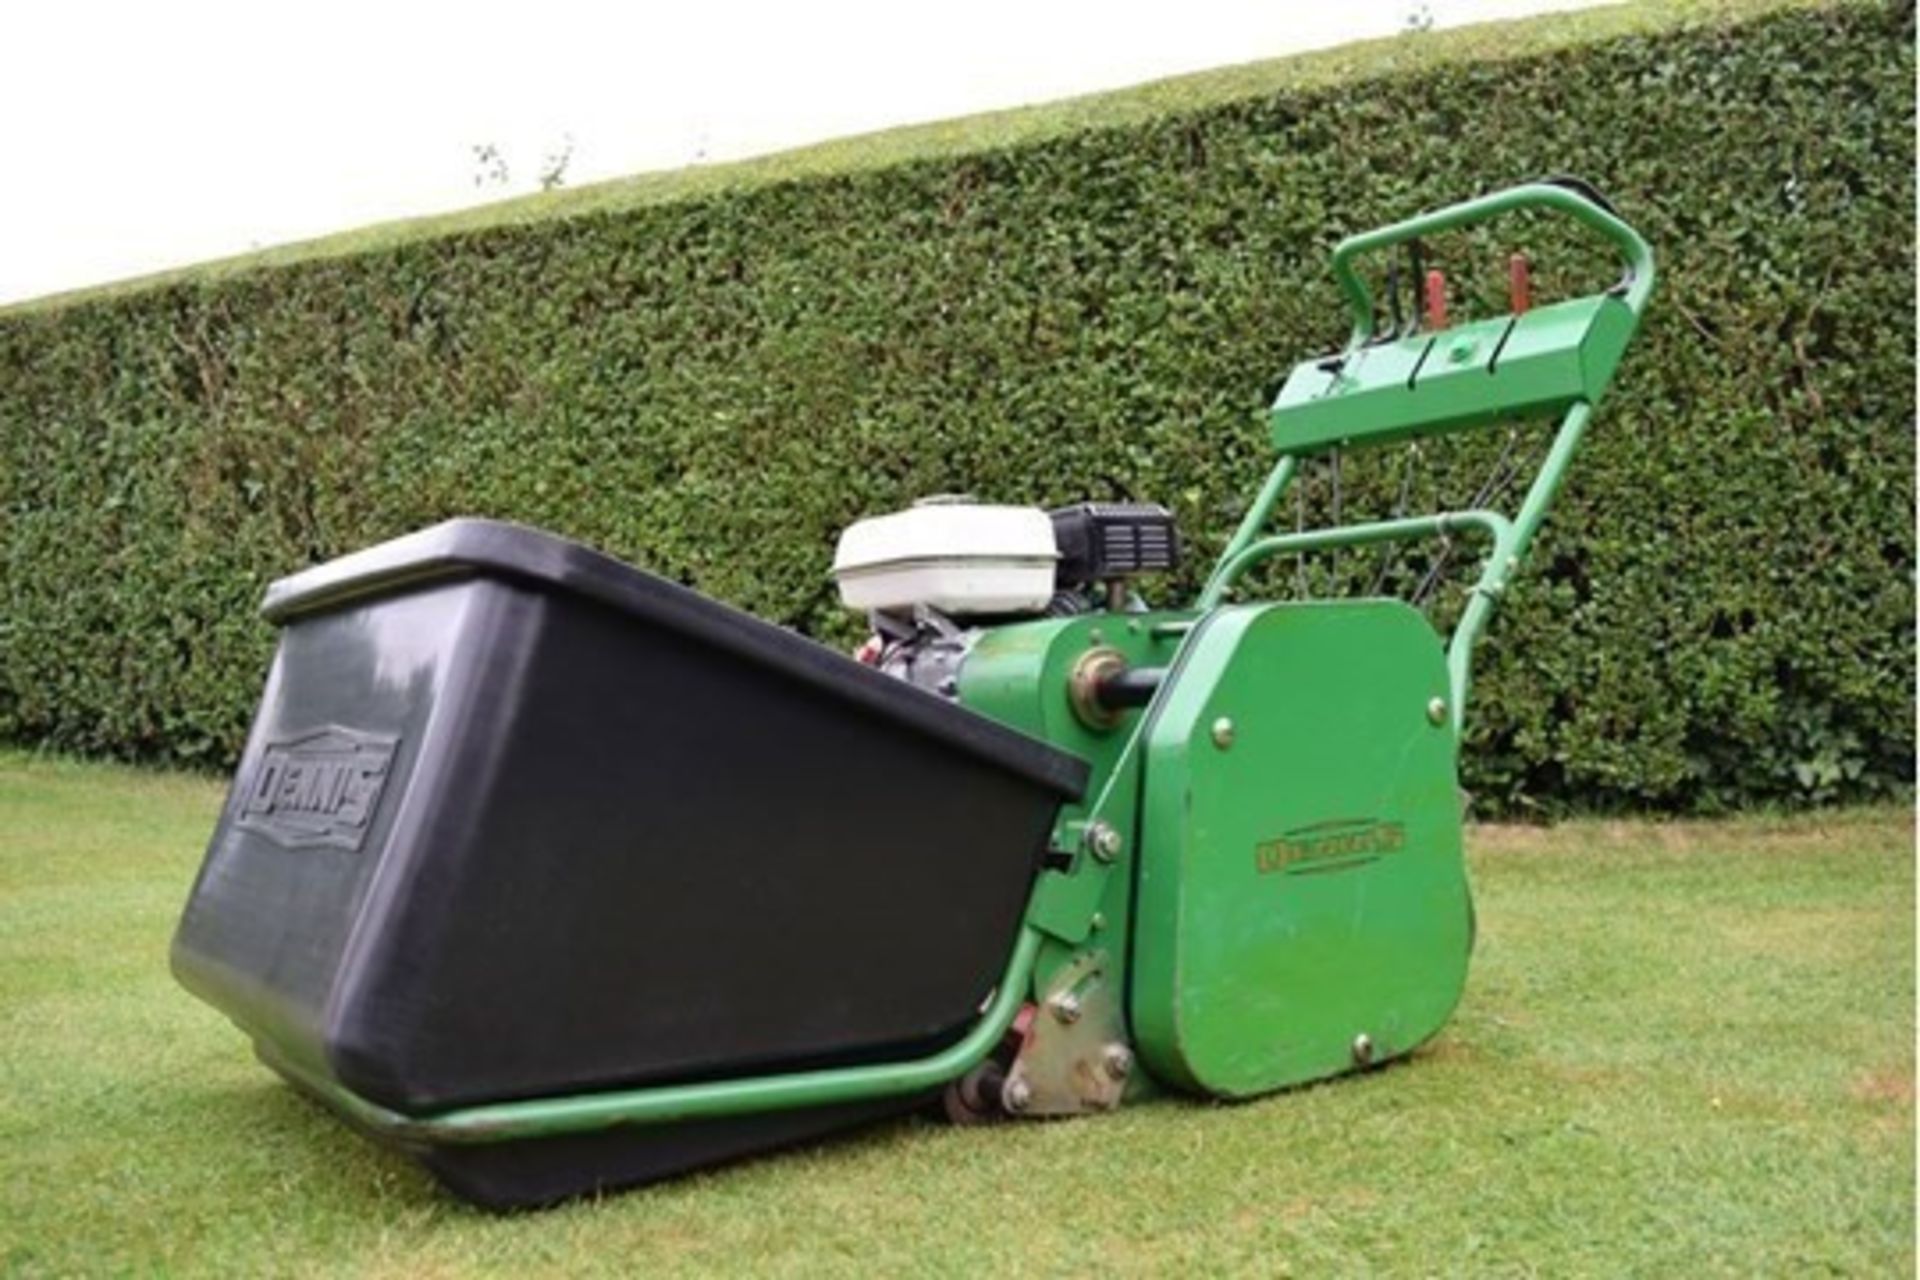 2004 Dennis G560 5 Blade Cylinder Mower With Grass Box - Image 12 of 12